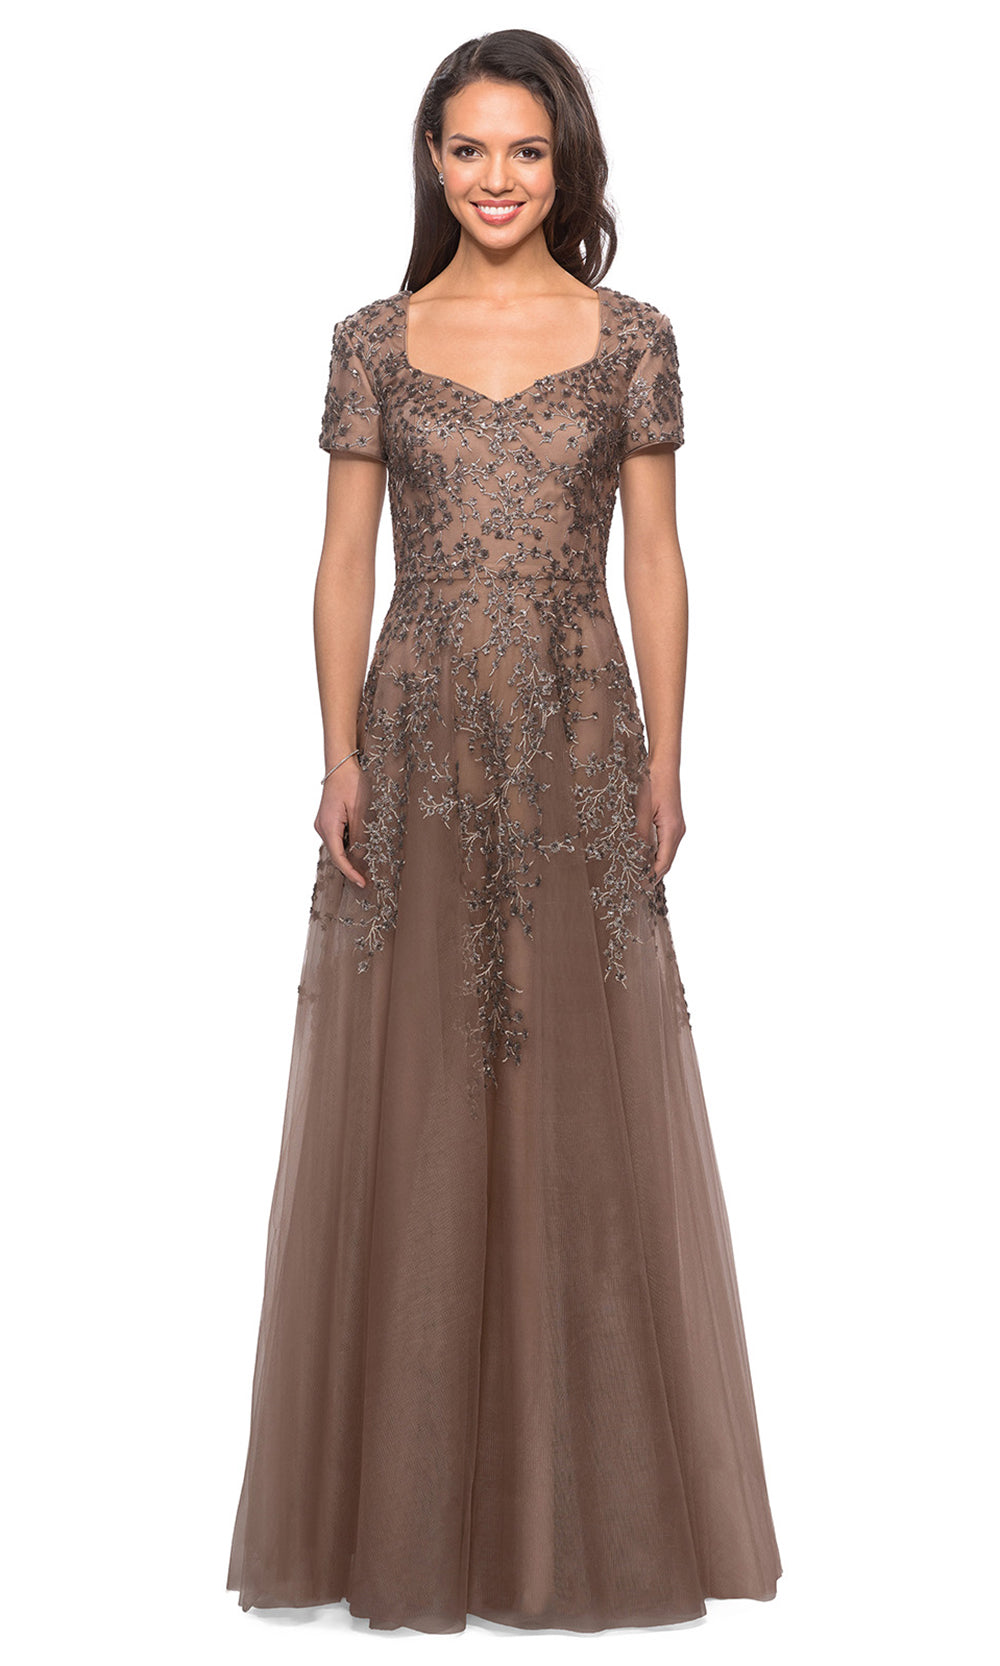 La Femme - 28037 Short Sleeve Embroidered Lace Tulle Dress In Brown